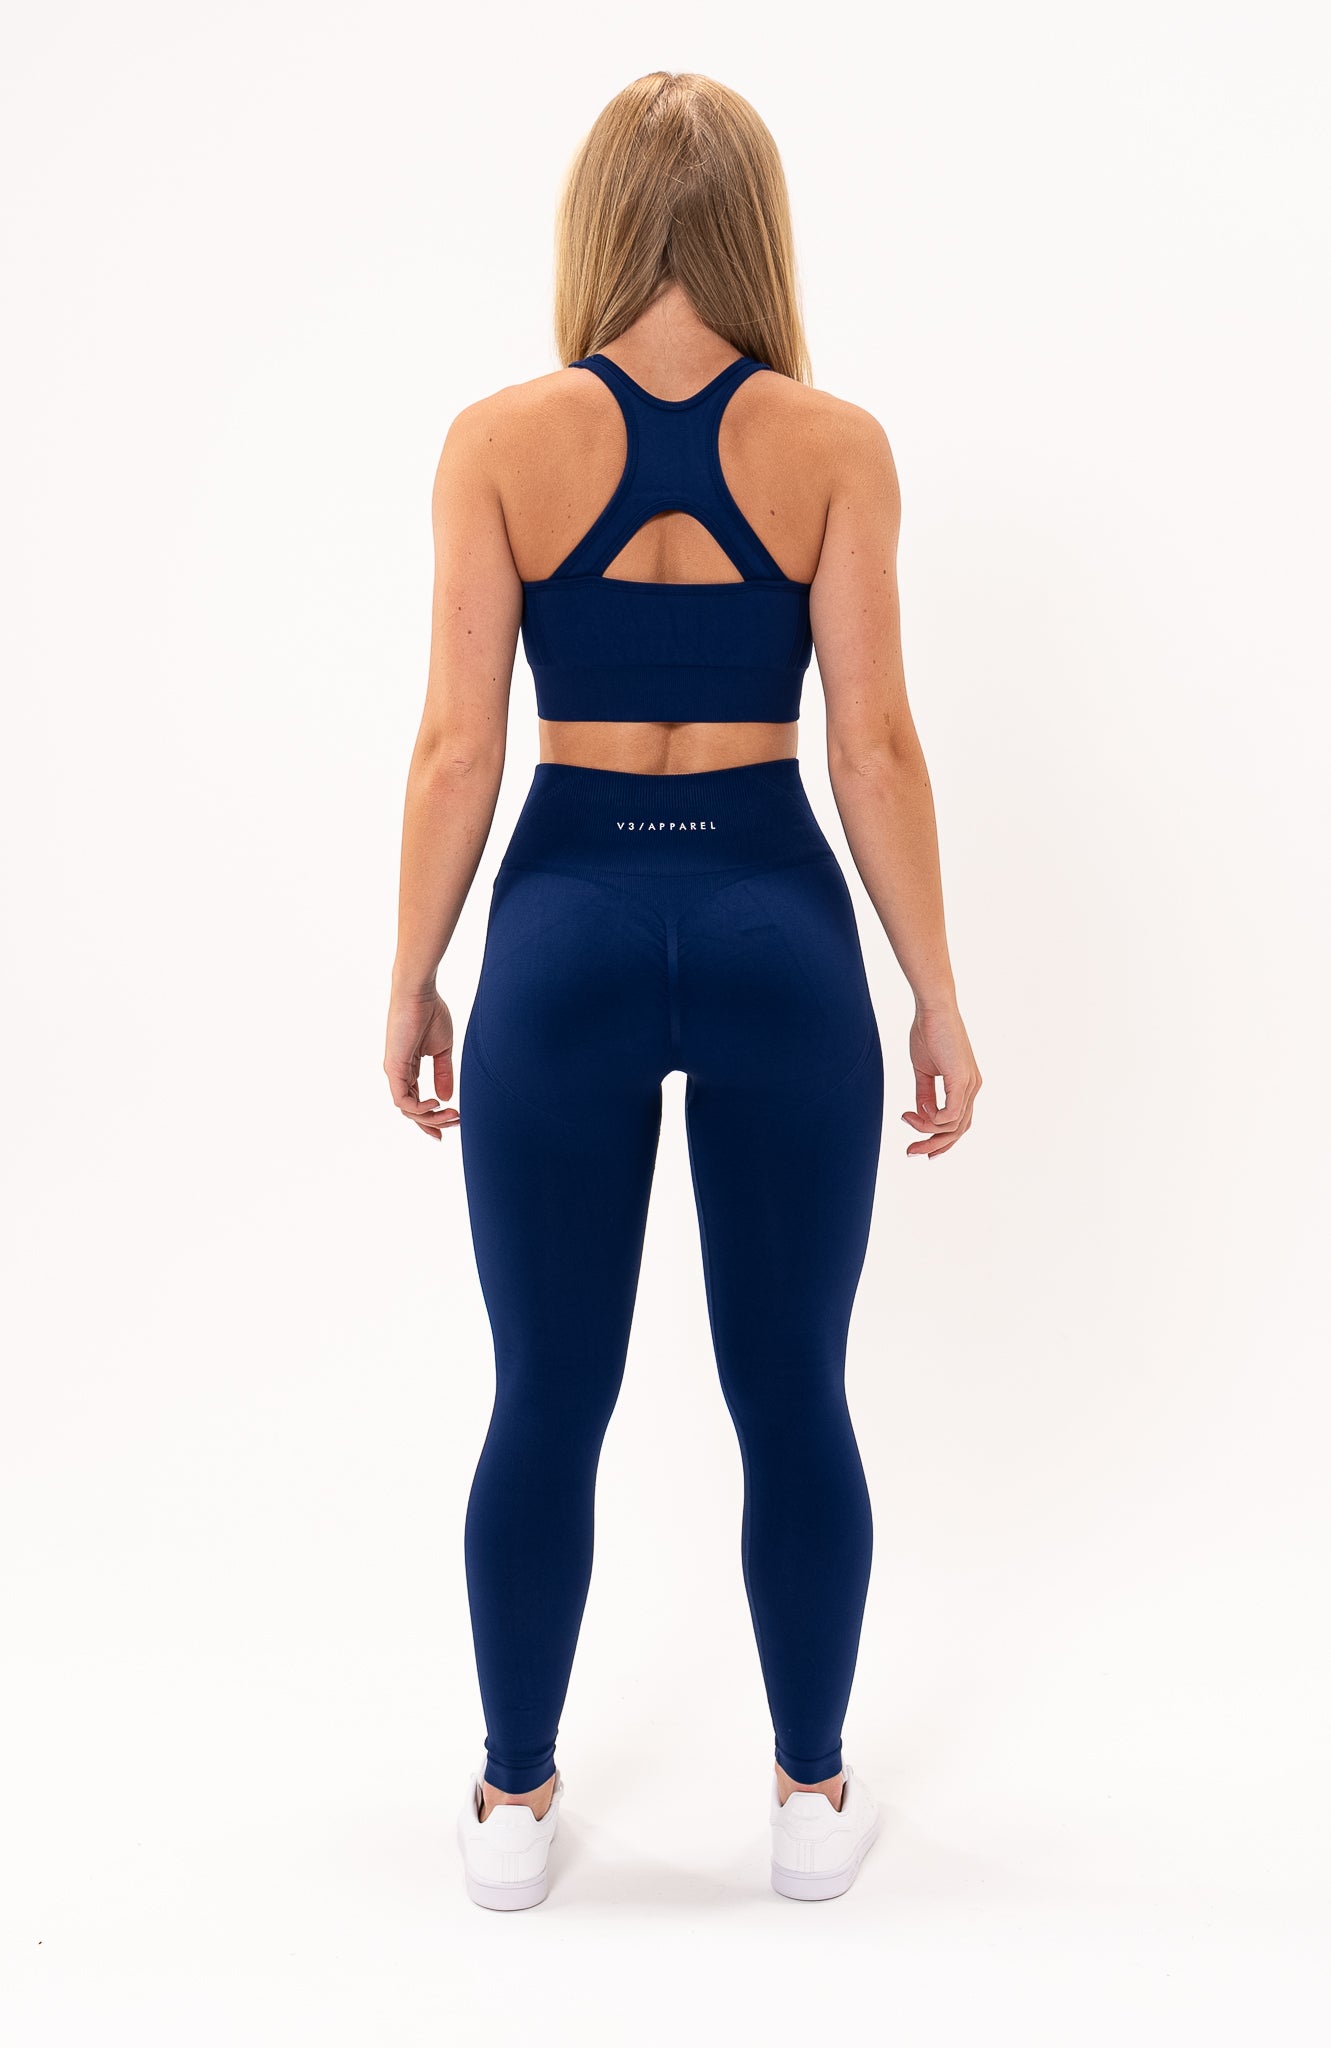 redbaysand Women's Tempo seamless scrunch bum shaping high waisted leggings and training sports bra in royal navy blue – Squat proof sports tights and training bra for Gym workouts training, Running, yoga, bodybuilding and bikini fitness.